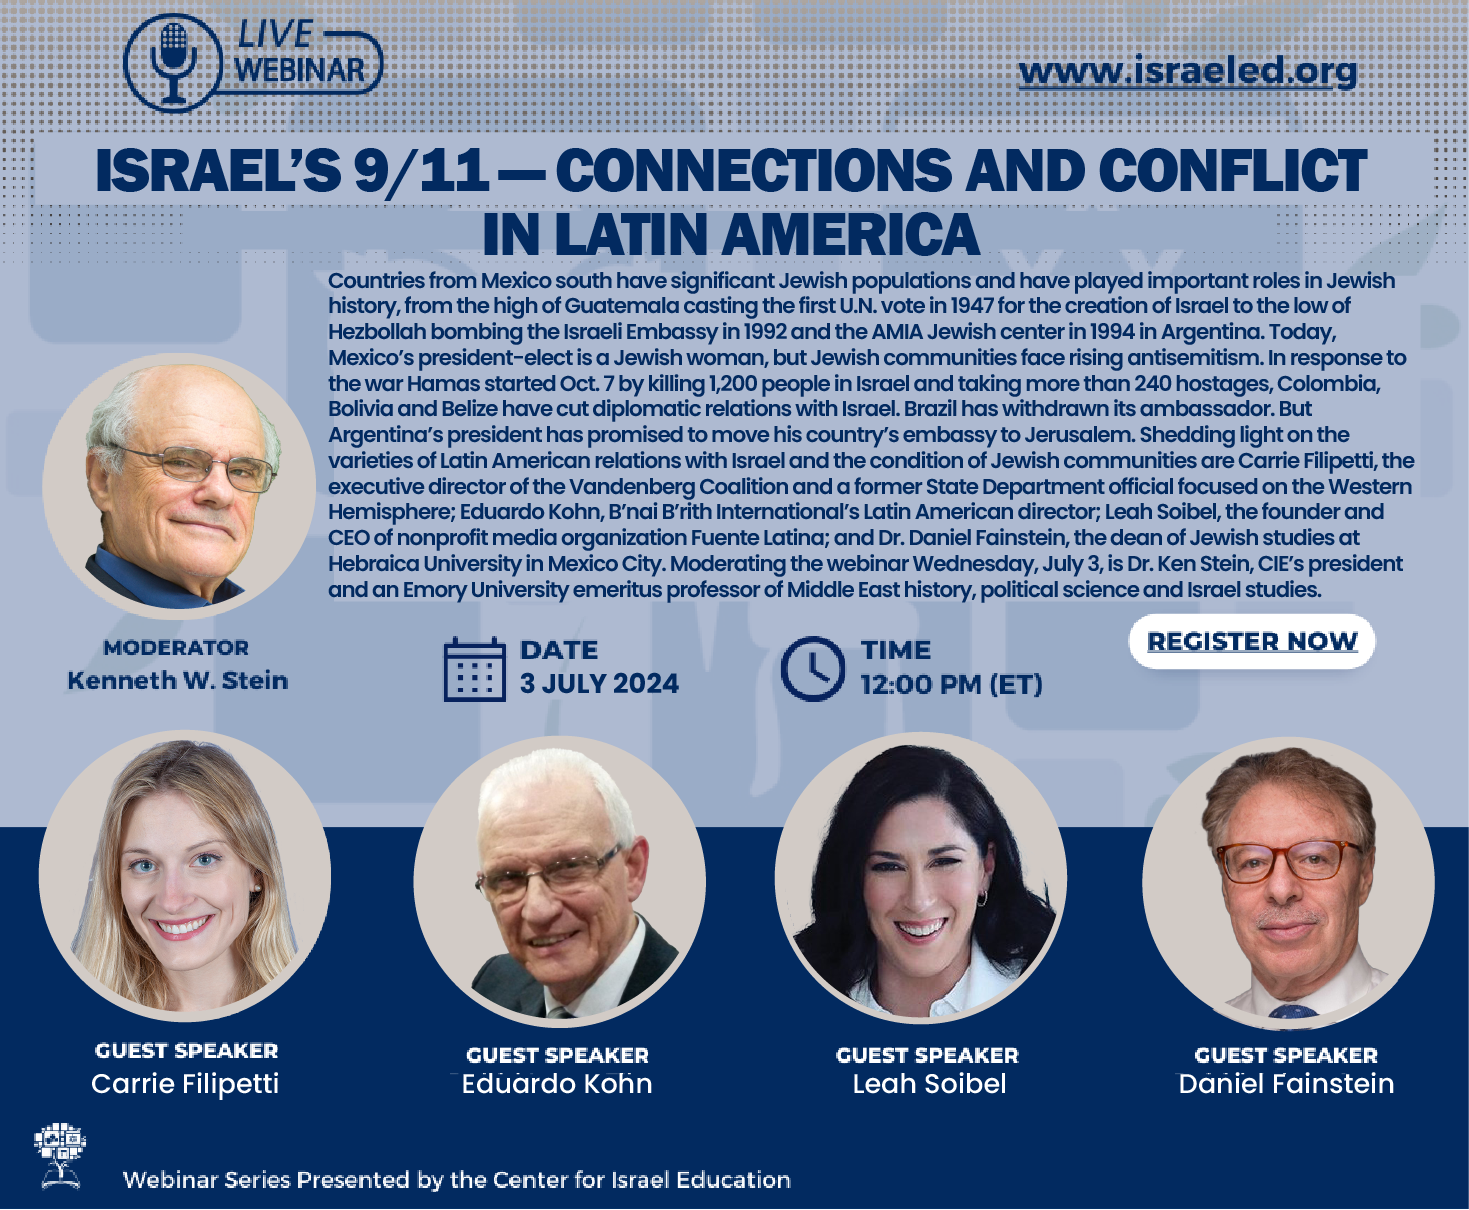 Israel’s 9/11 — Connections and Conflict in Latin America